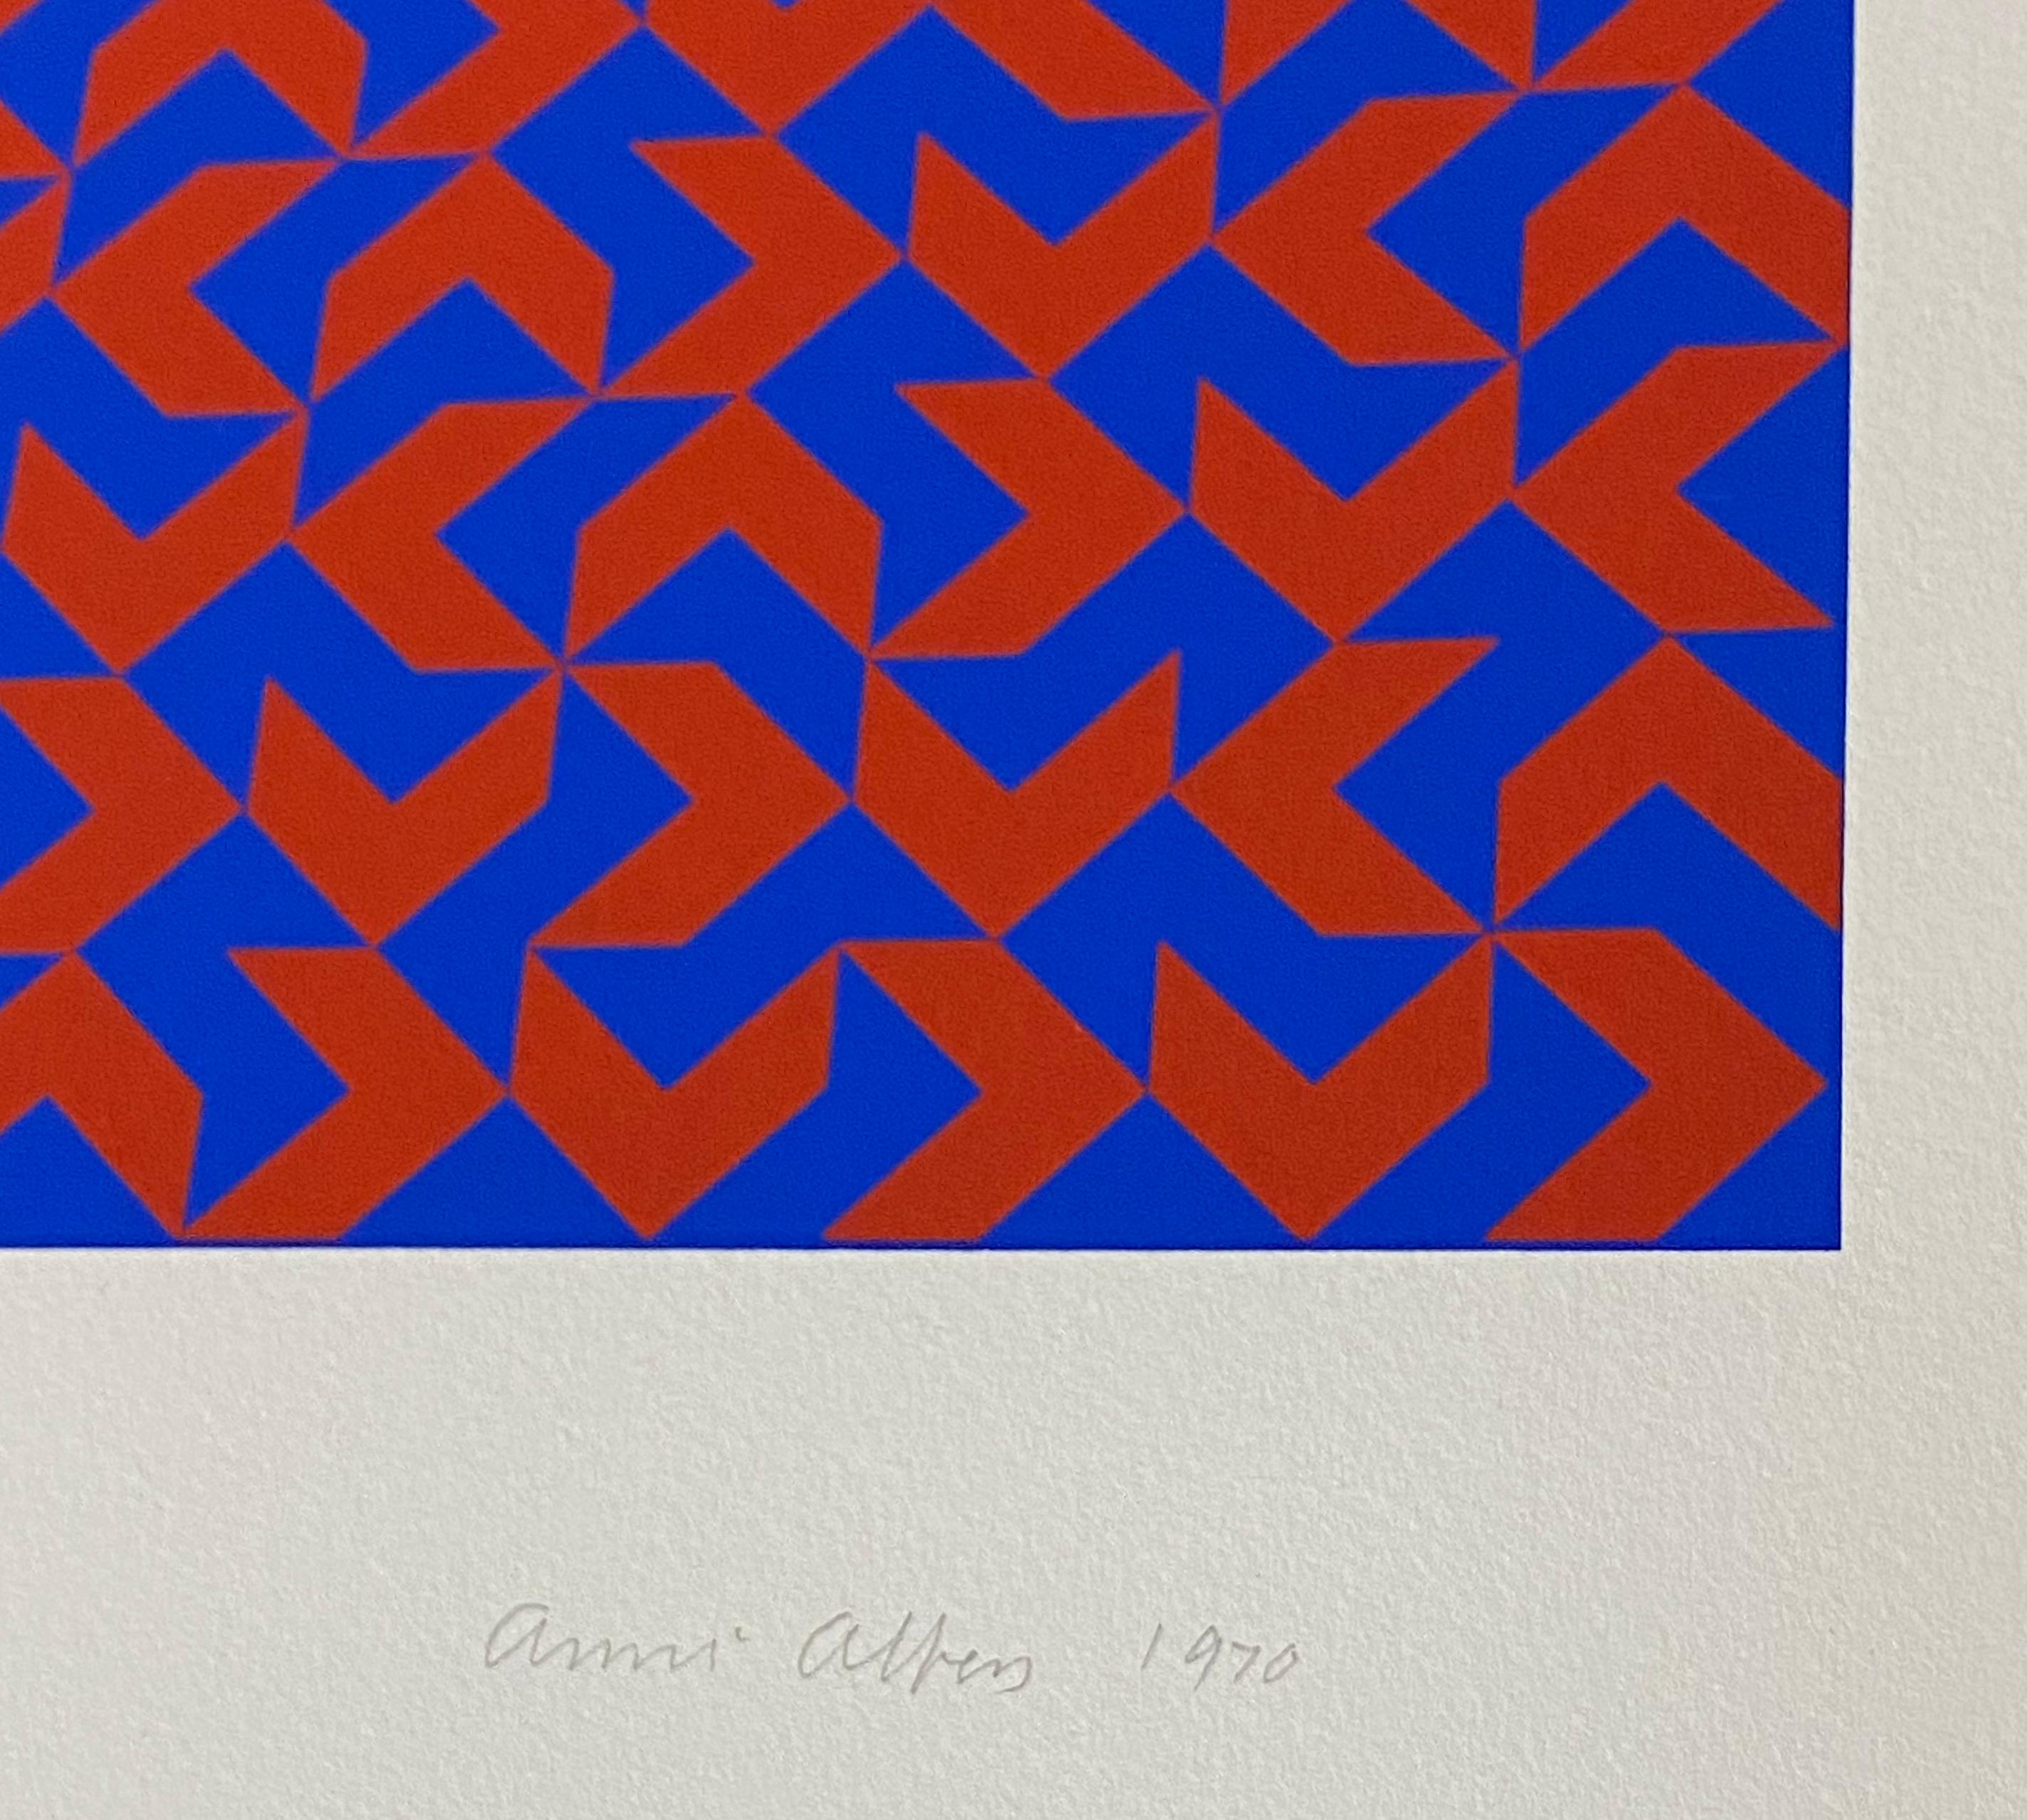 Artist: Anni Albers, German/American (1899 - 1994)
Title: GR I
Year: 1970
Medium: Silkscreen on Arches Paper, signed and numbered in pencil
Edition: 44/100
Image Size: 20 x 16 inches
Size: 29 x 24 in. (73.66 x 60.96 cm)